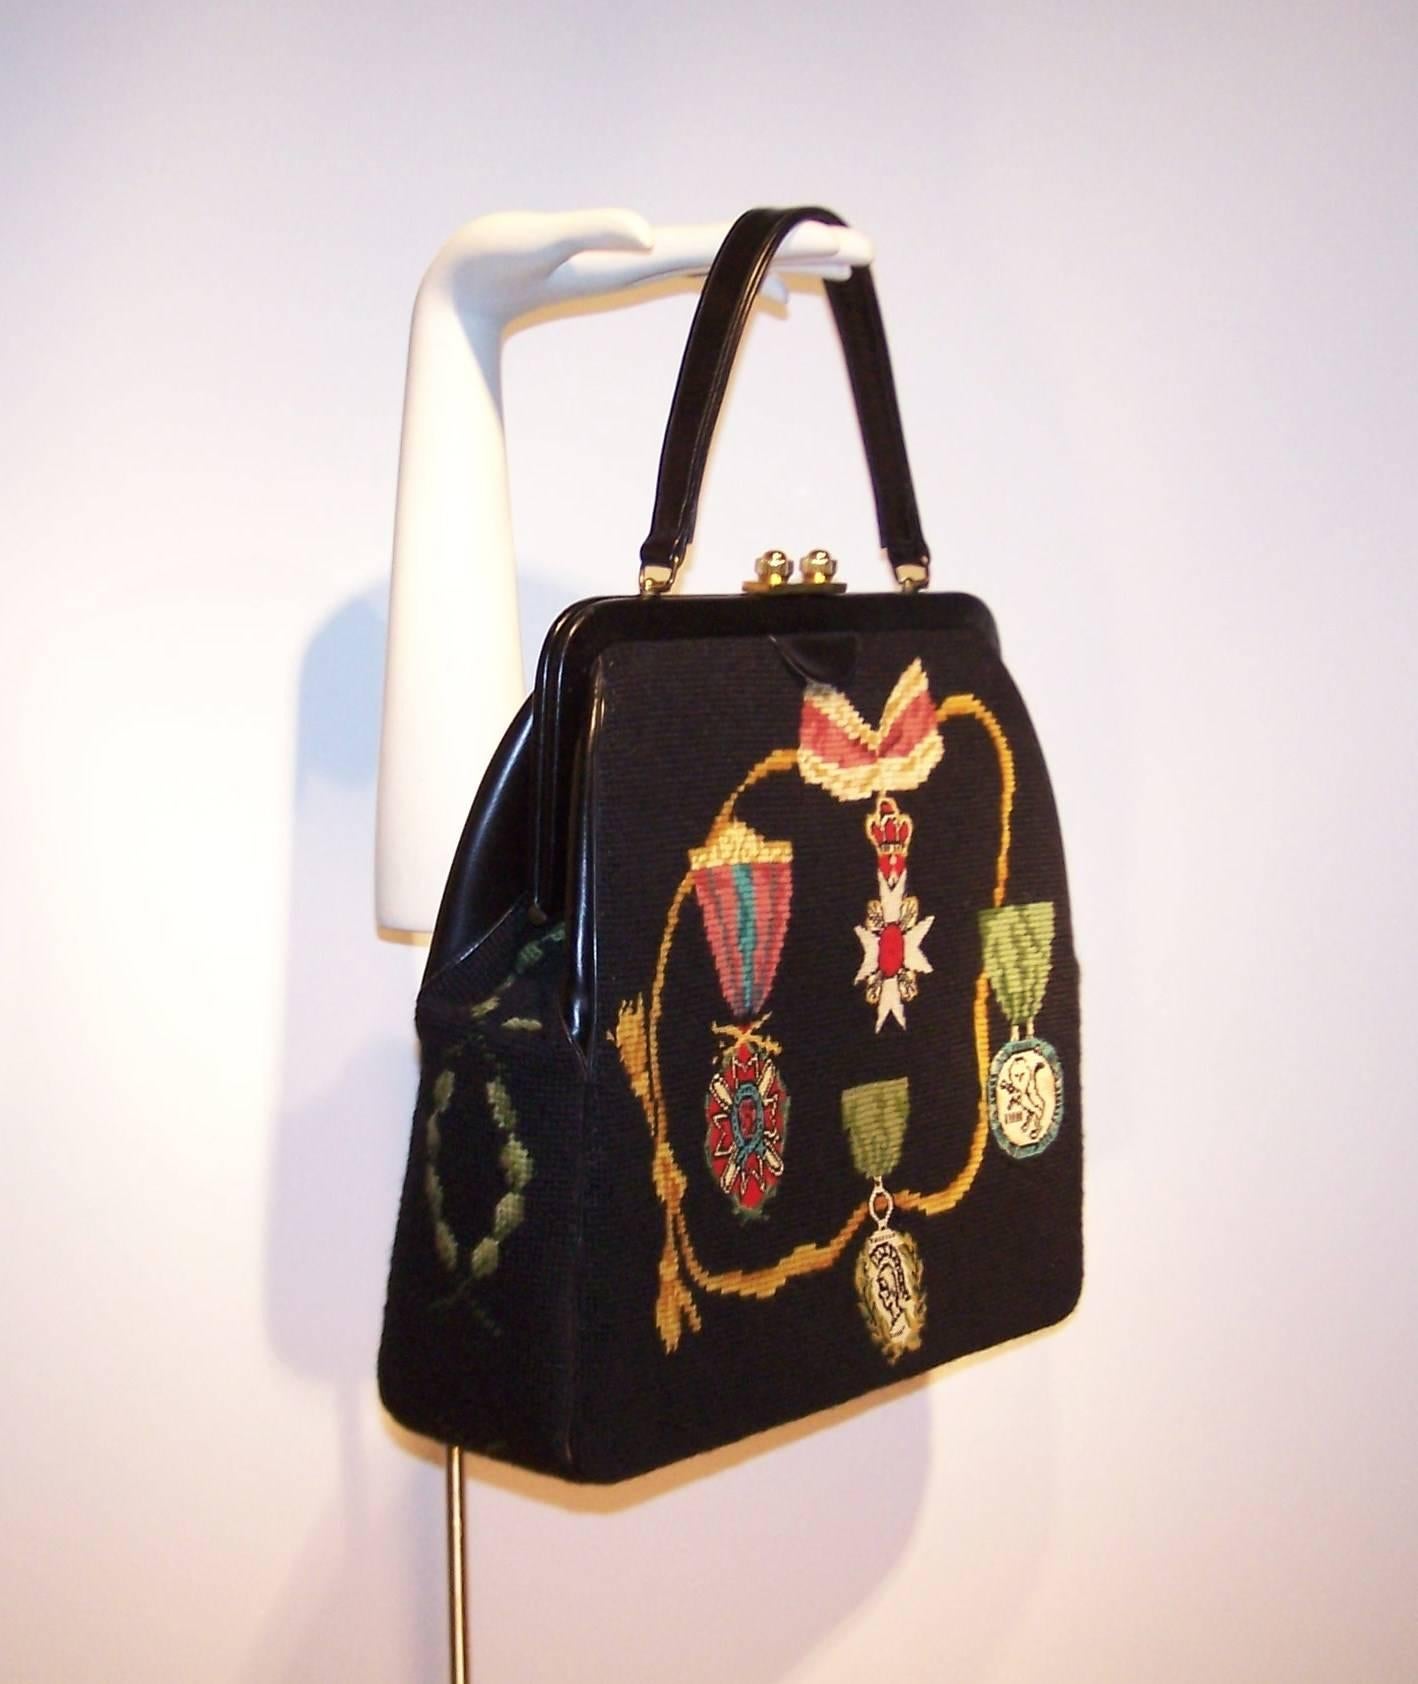 Faboo!  This 1950's trompe l'oeil needlepoint handbag is the be all end all.  The black background is decorated with needle work (including petit point) depicting medals and badges of honor in vibrant royal colors.  The back side depicts a crown and